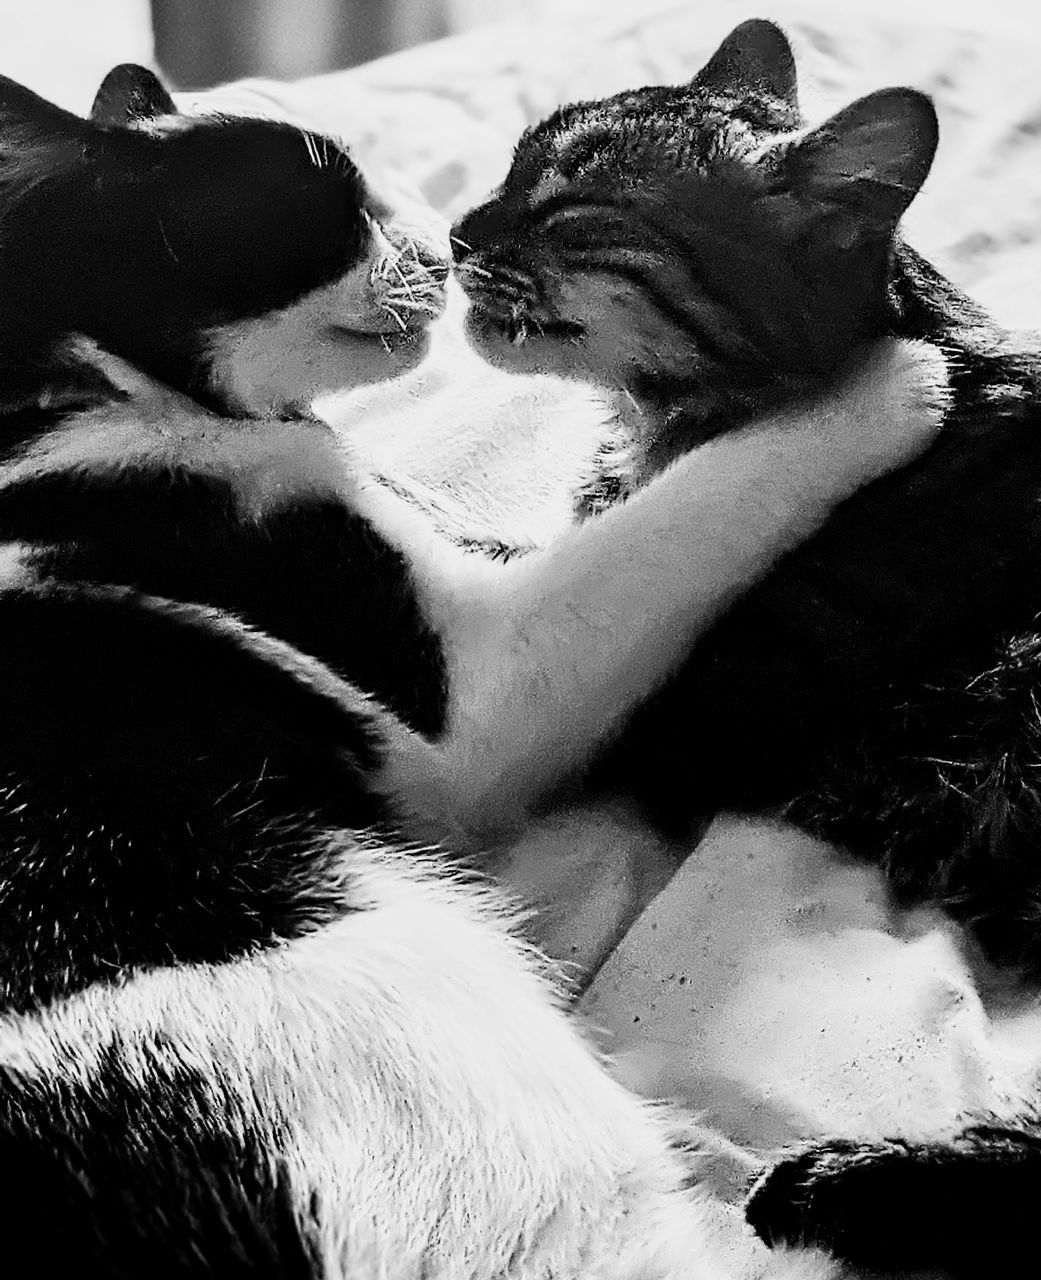 black, animal, animal themes, black and white, mammal, white, monochrome photography, monochrome, cat, pet, domestic animals, one animal, whiskers, carnivore, close-up, no people, nose, animal body part, dog, relaxation, canine, feline